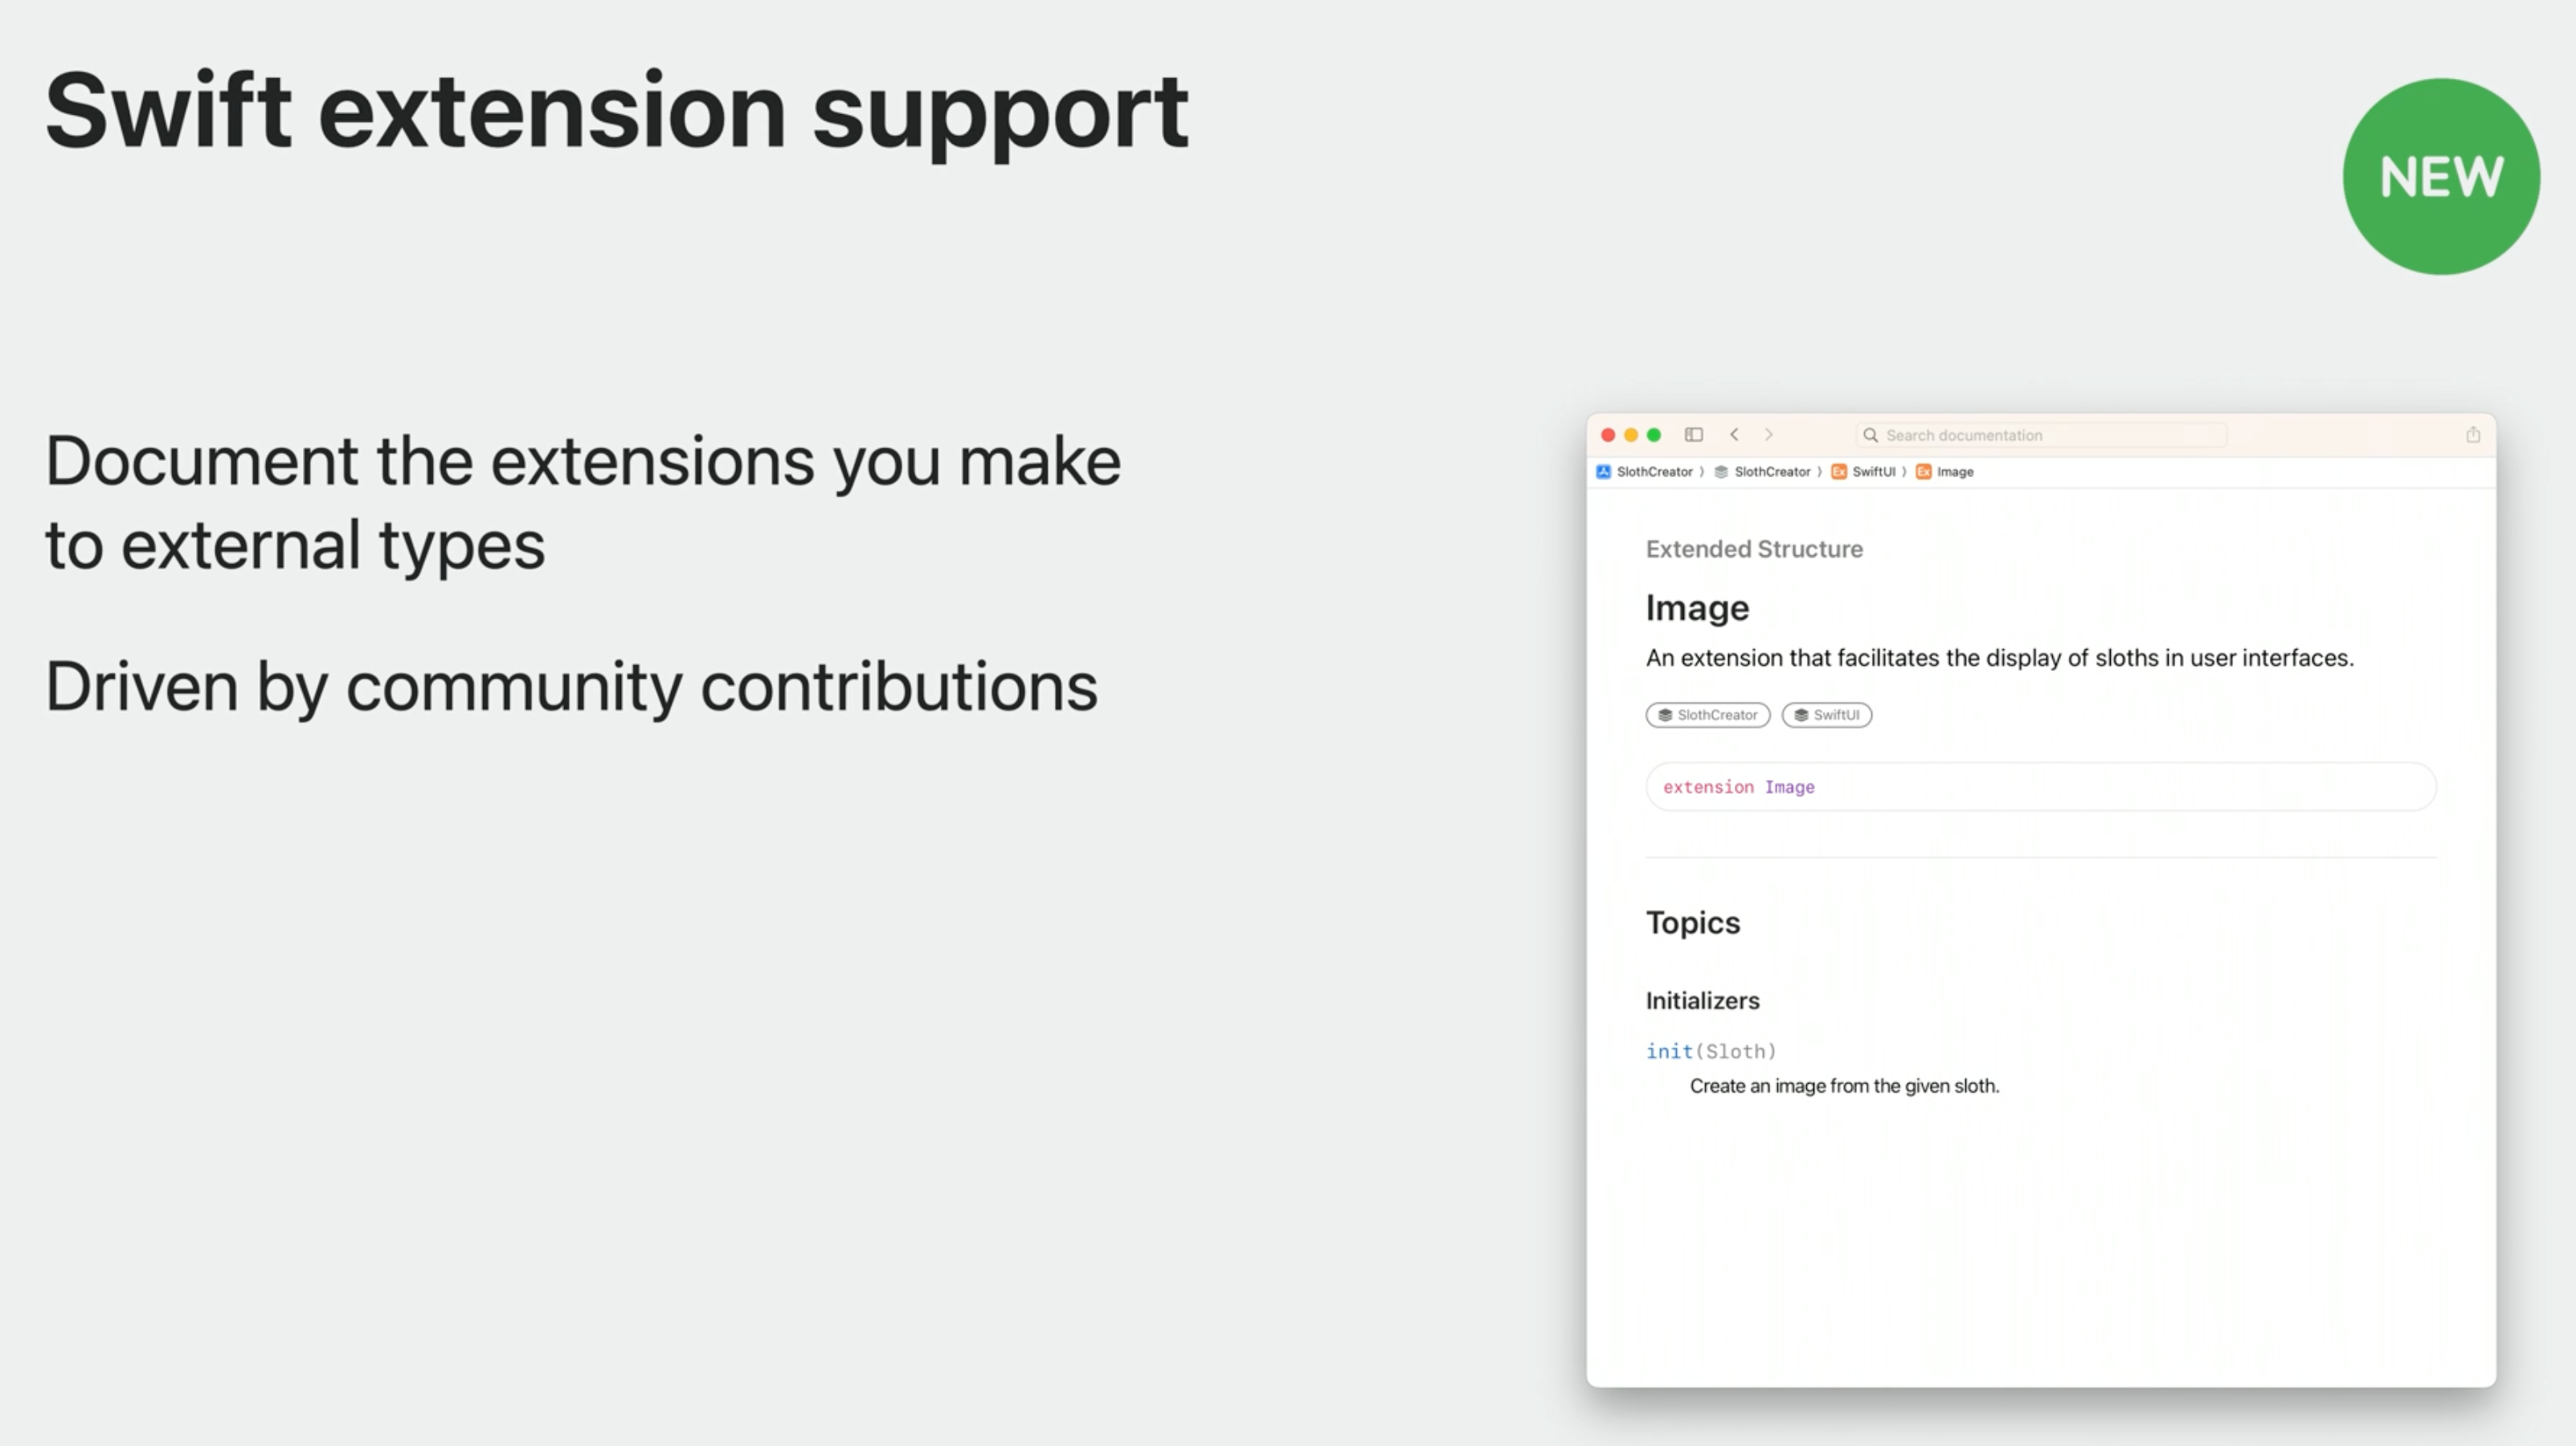 Swift extension support